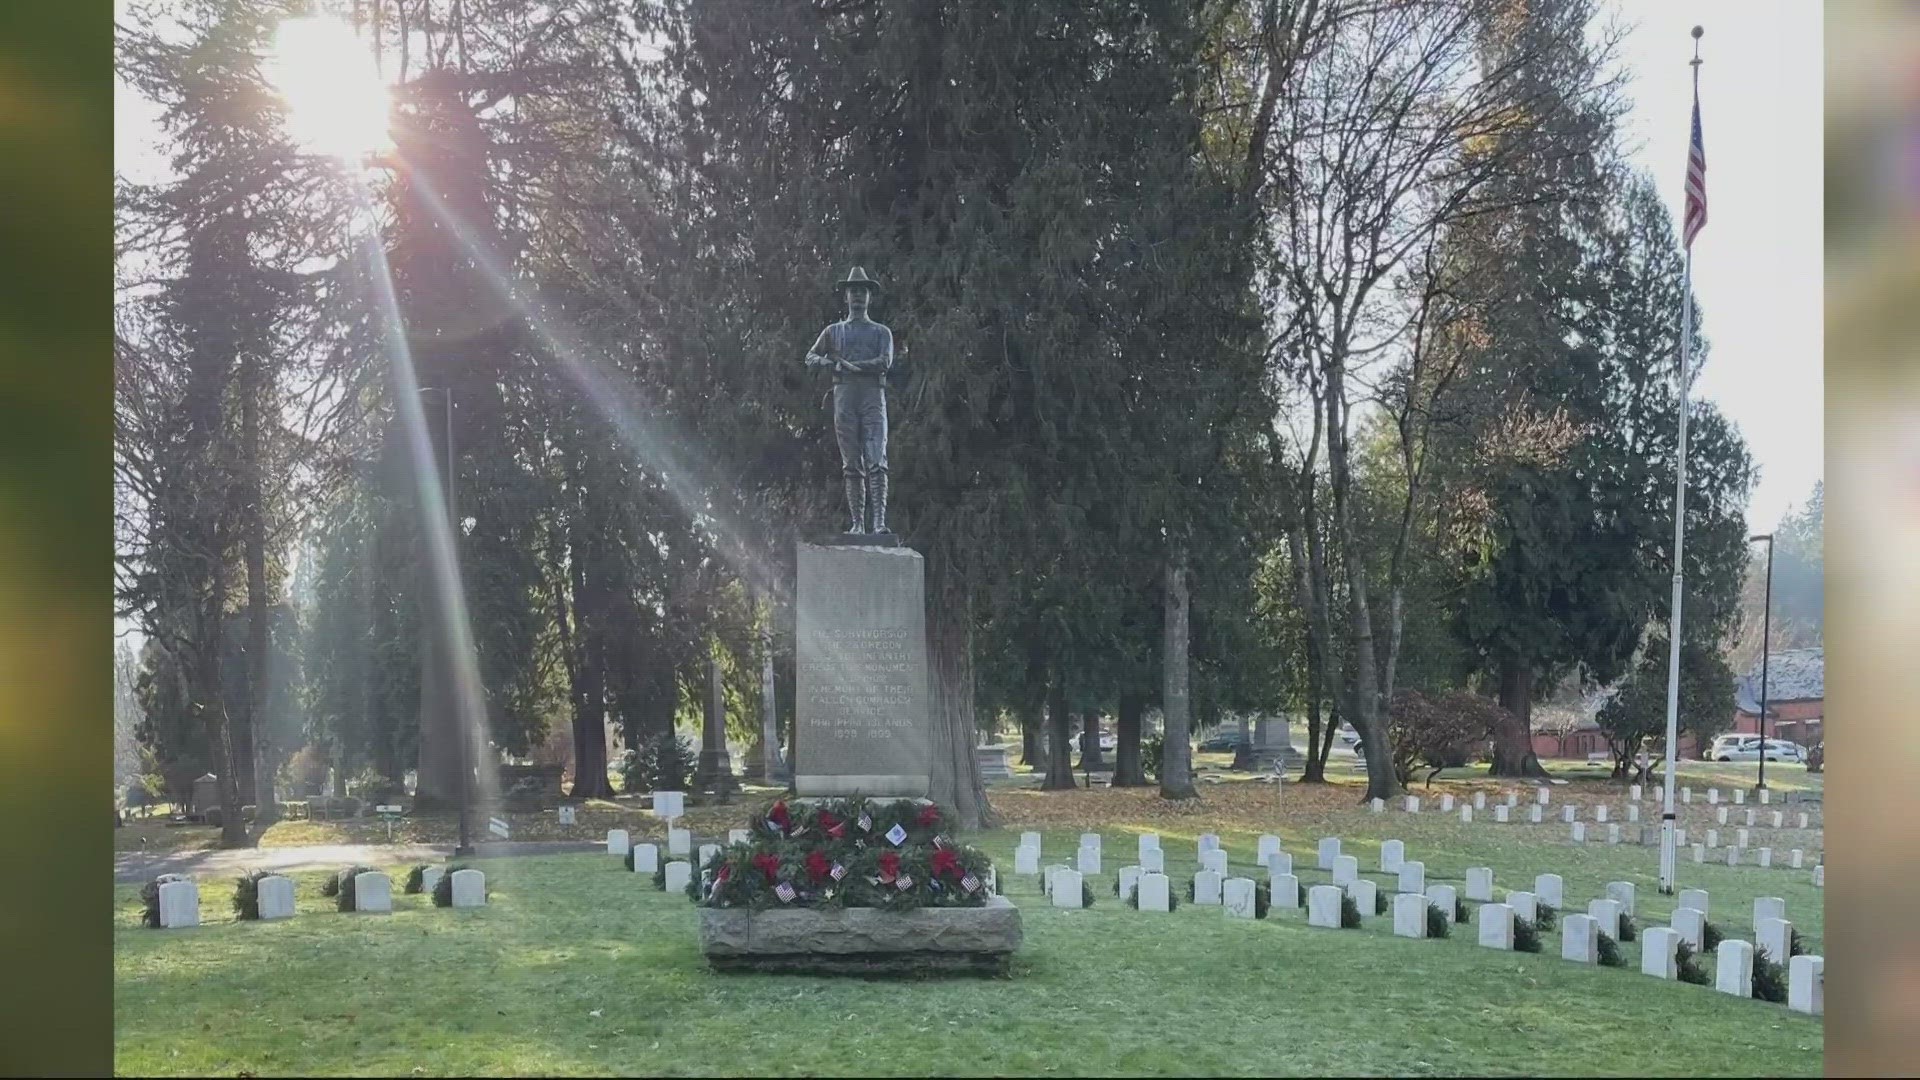 The Historic River View Cemetery say the Spanish War Monument's soldier vanished over the Thanksgiving holiday.